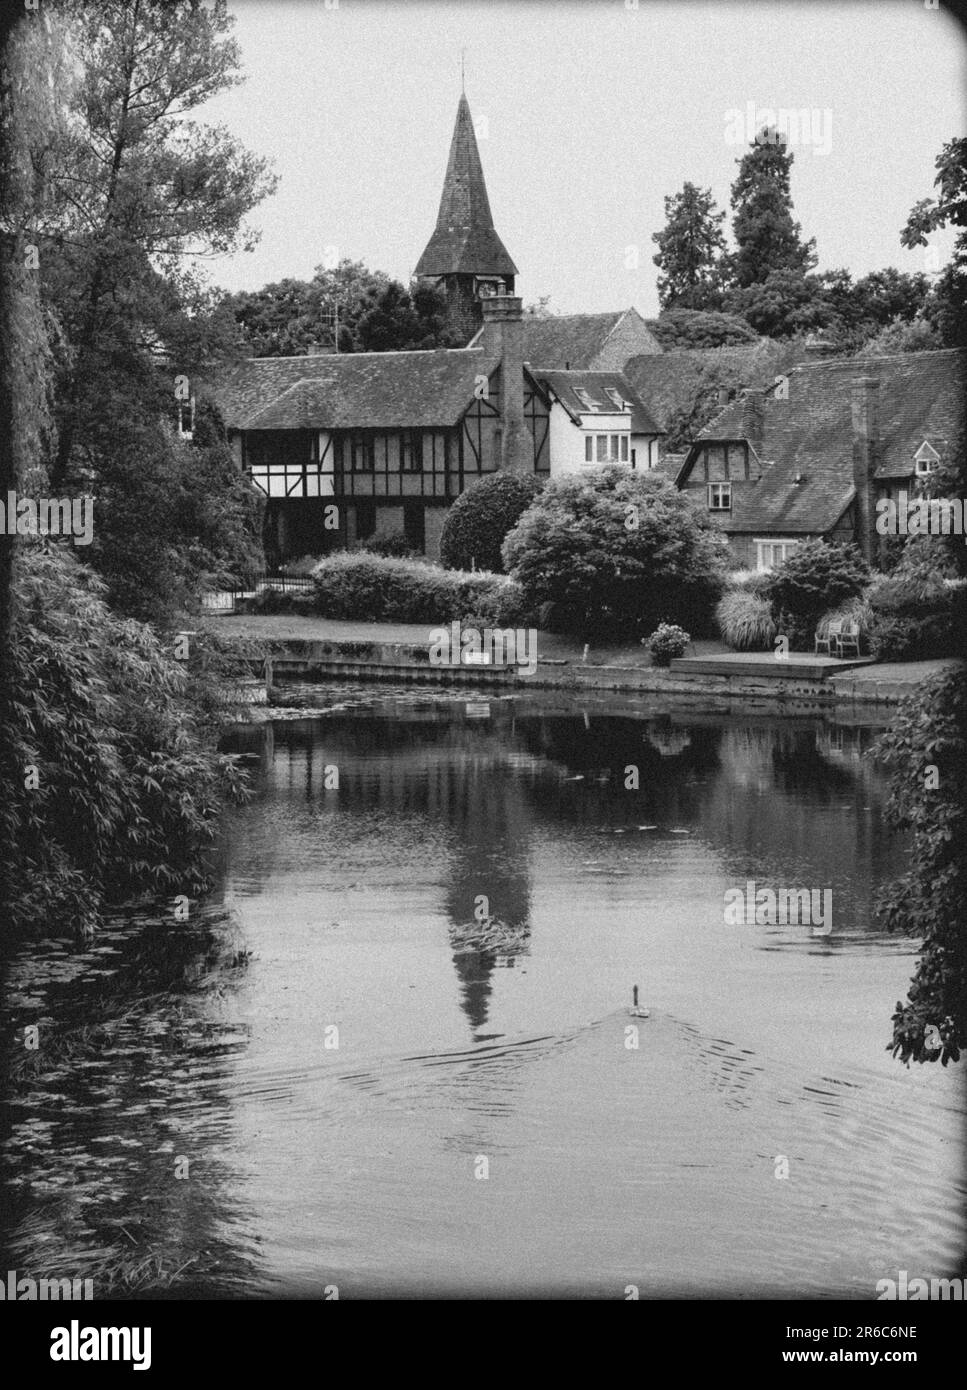 B&W Landscape, Whitchurch-on-Thames, Oxfordshire, Angleterre, Royaume-Uni, GO. Banque D'Images